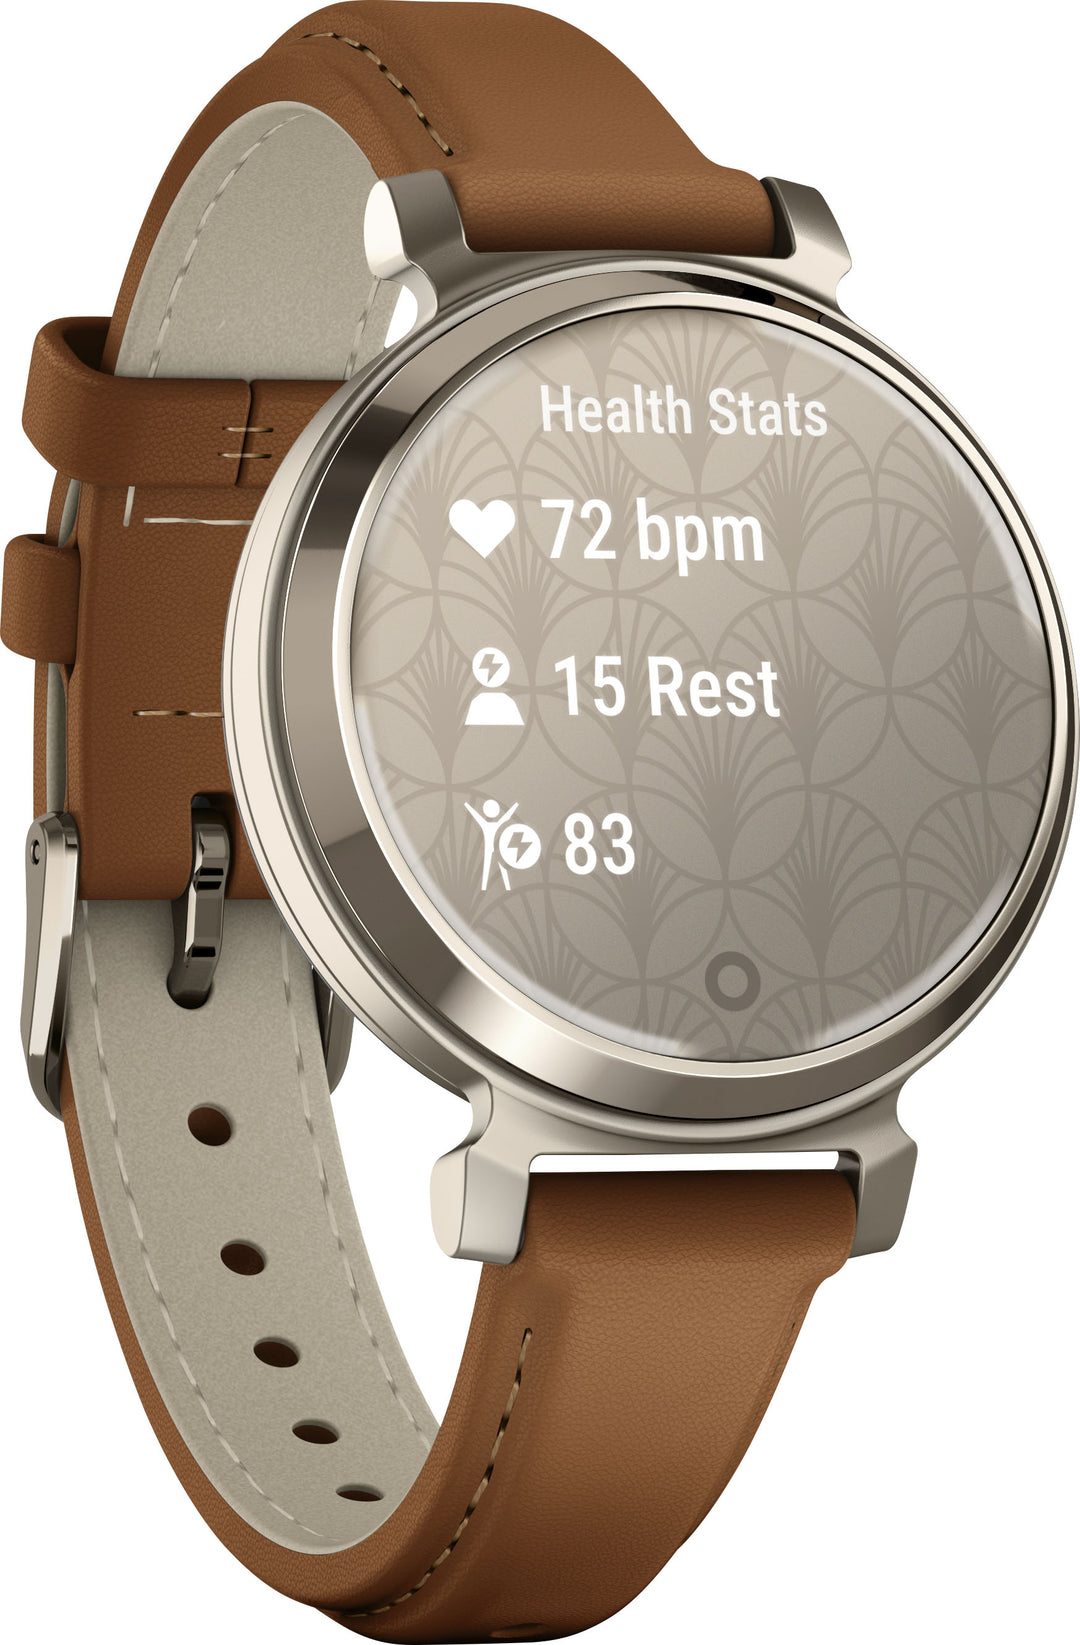 Garmin - Lily 2 Classic Smartwatch 34 mm Anodized Aluminum - Cream Gold with Tan Leather Band_2